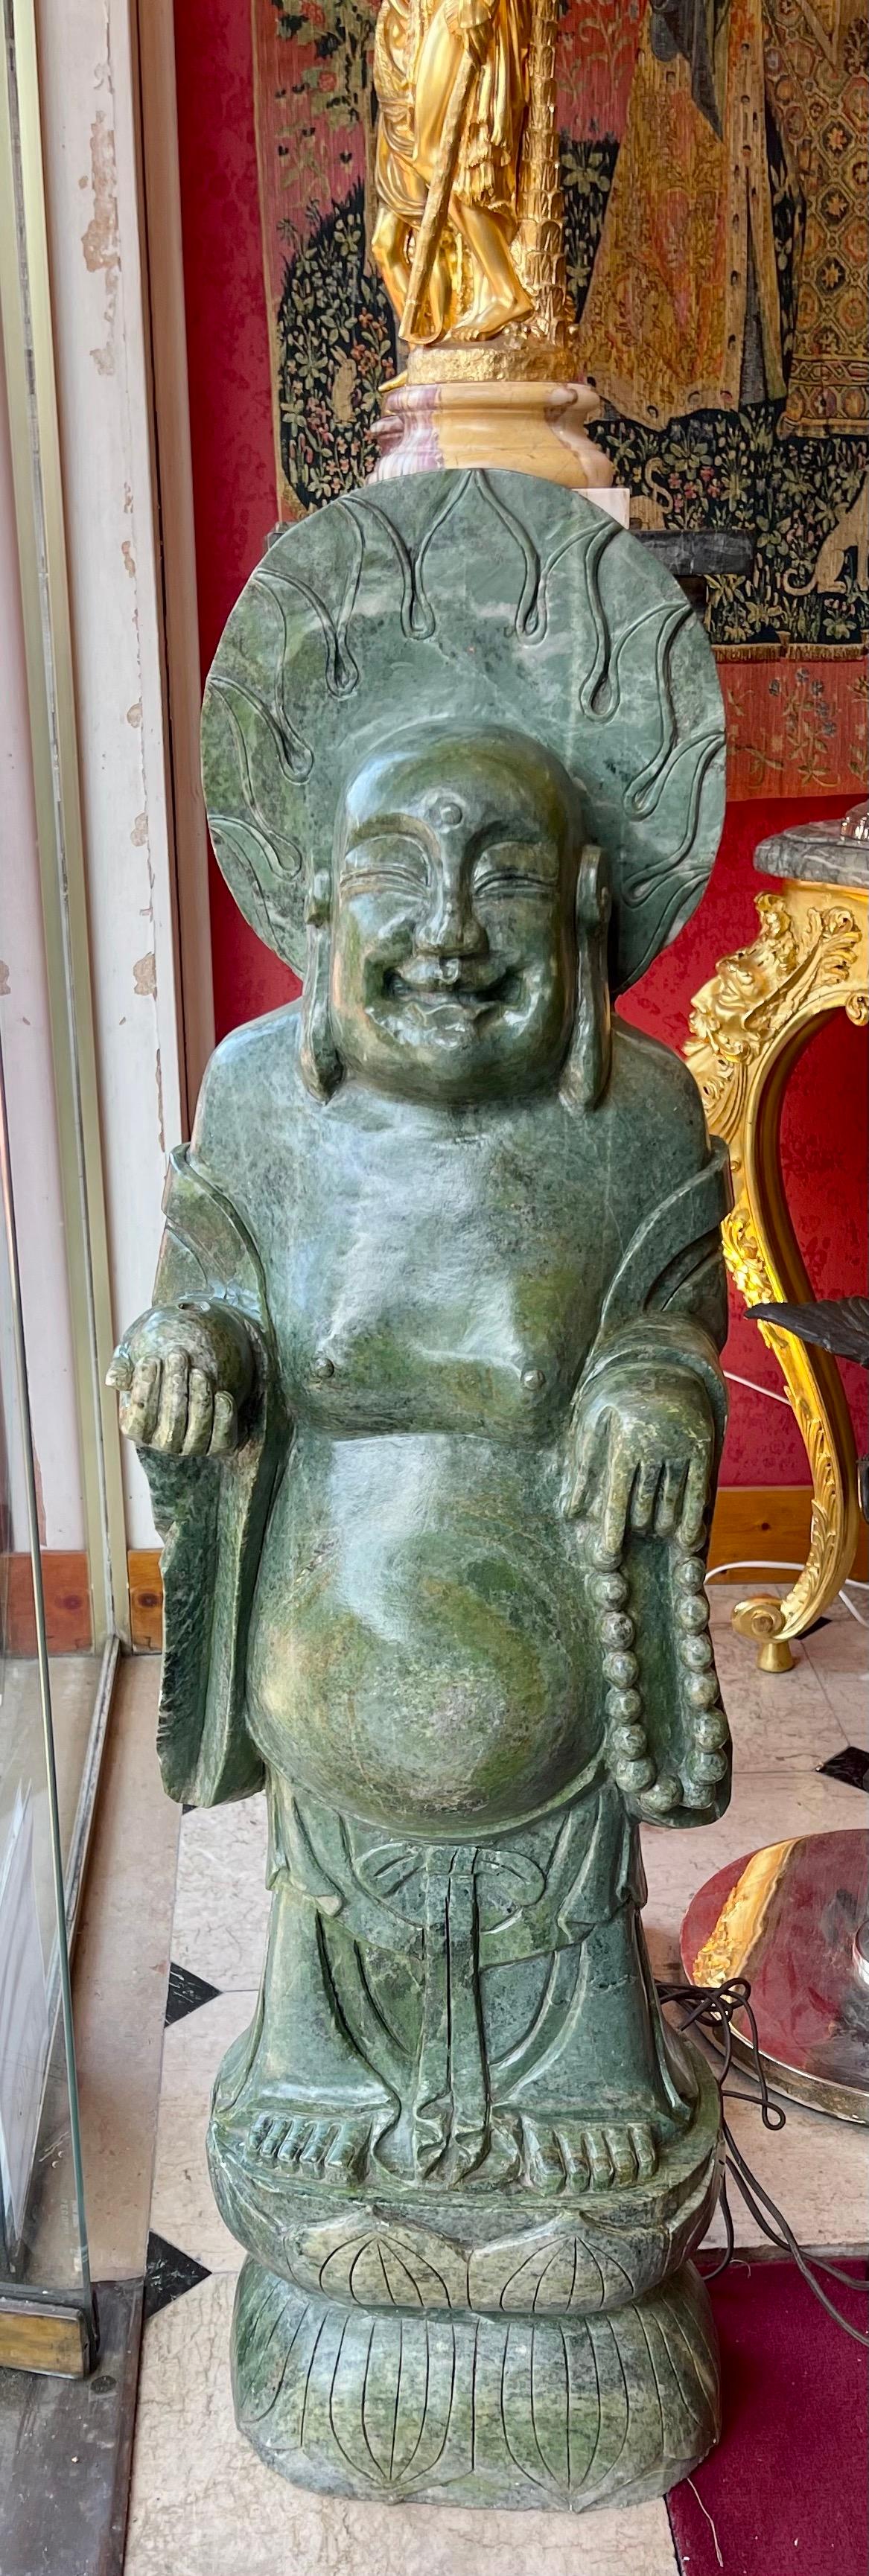 19th Century Large Laughing Buddha Statue - Green Hard Stone - China - Period: Art Nouveau For Sale